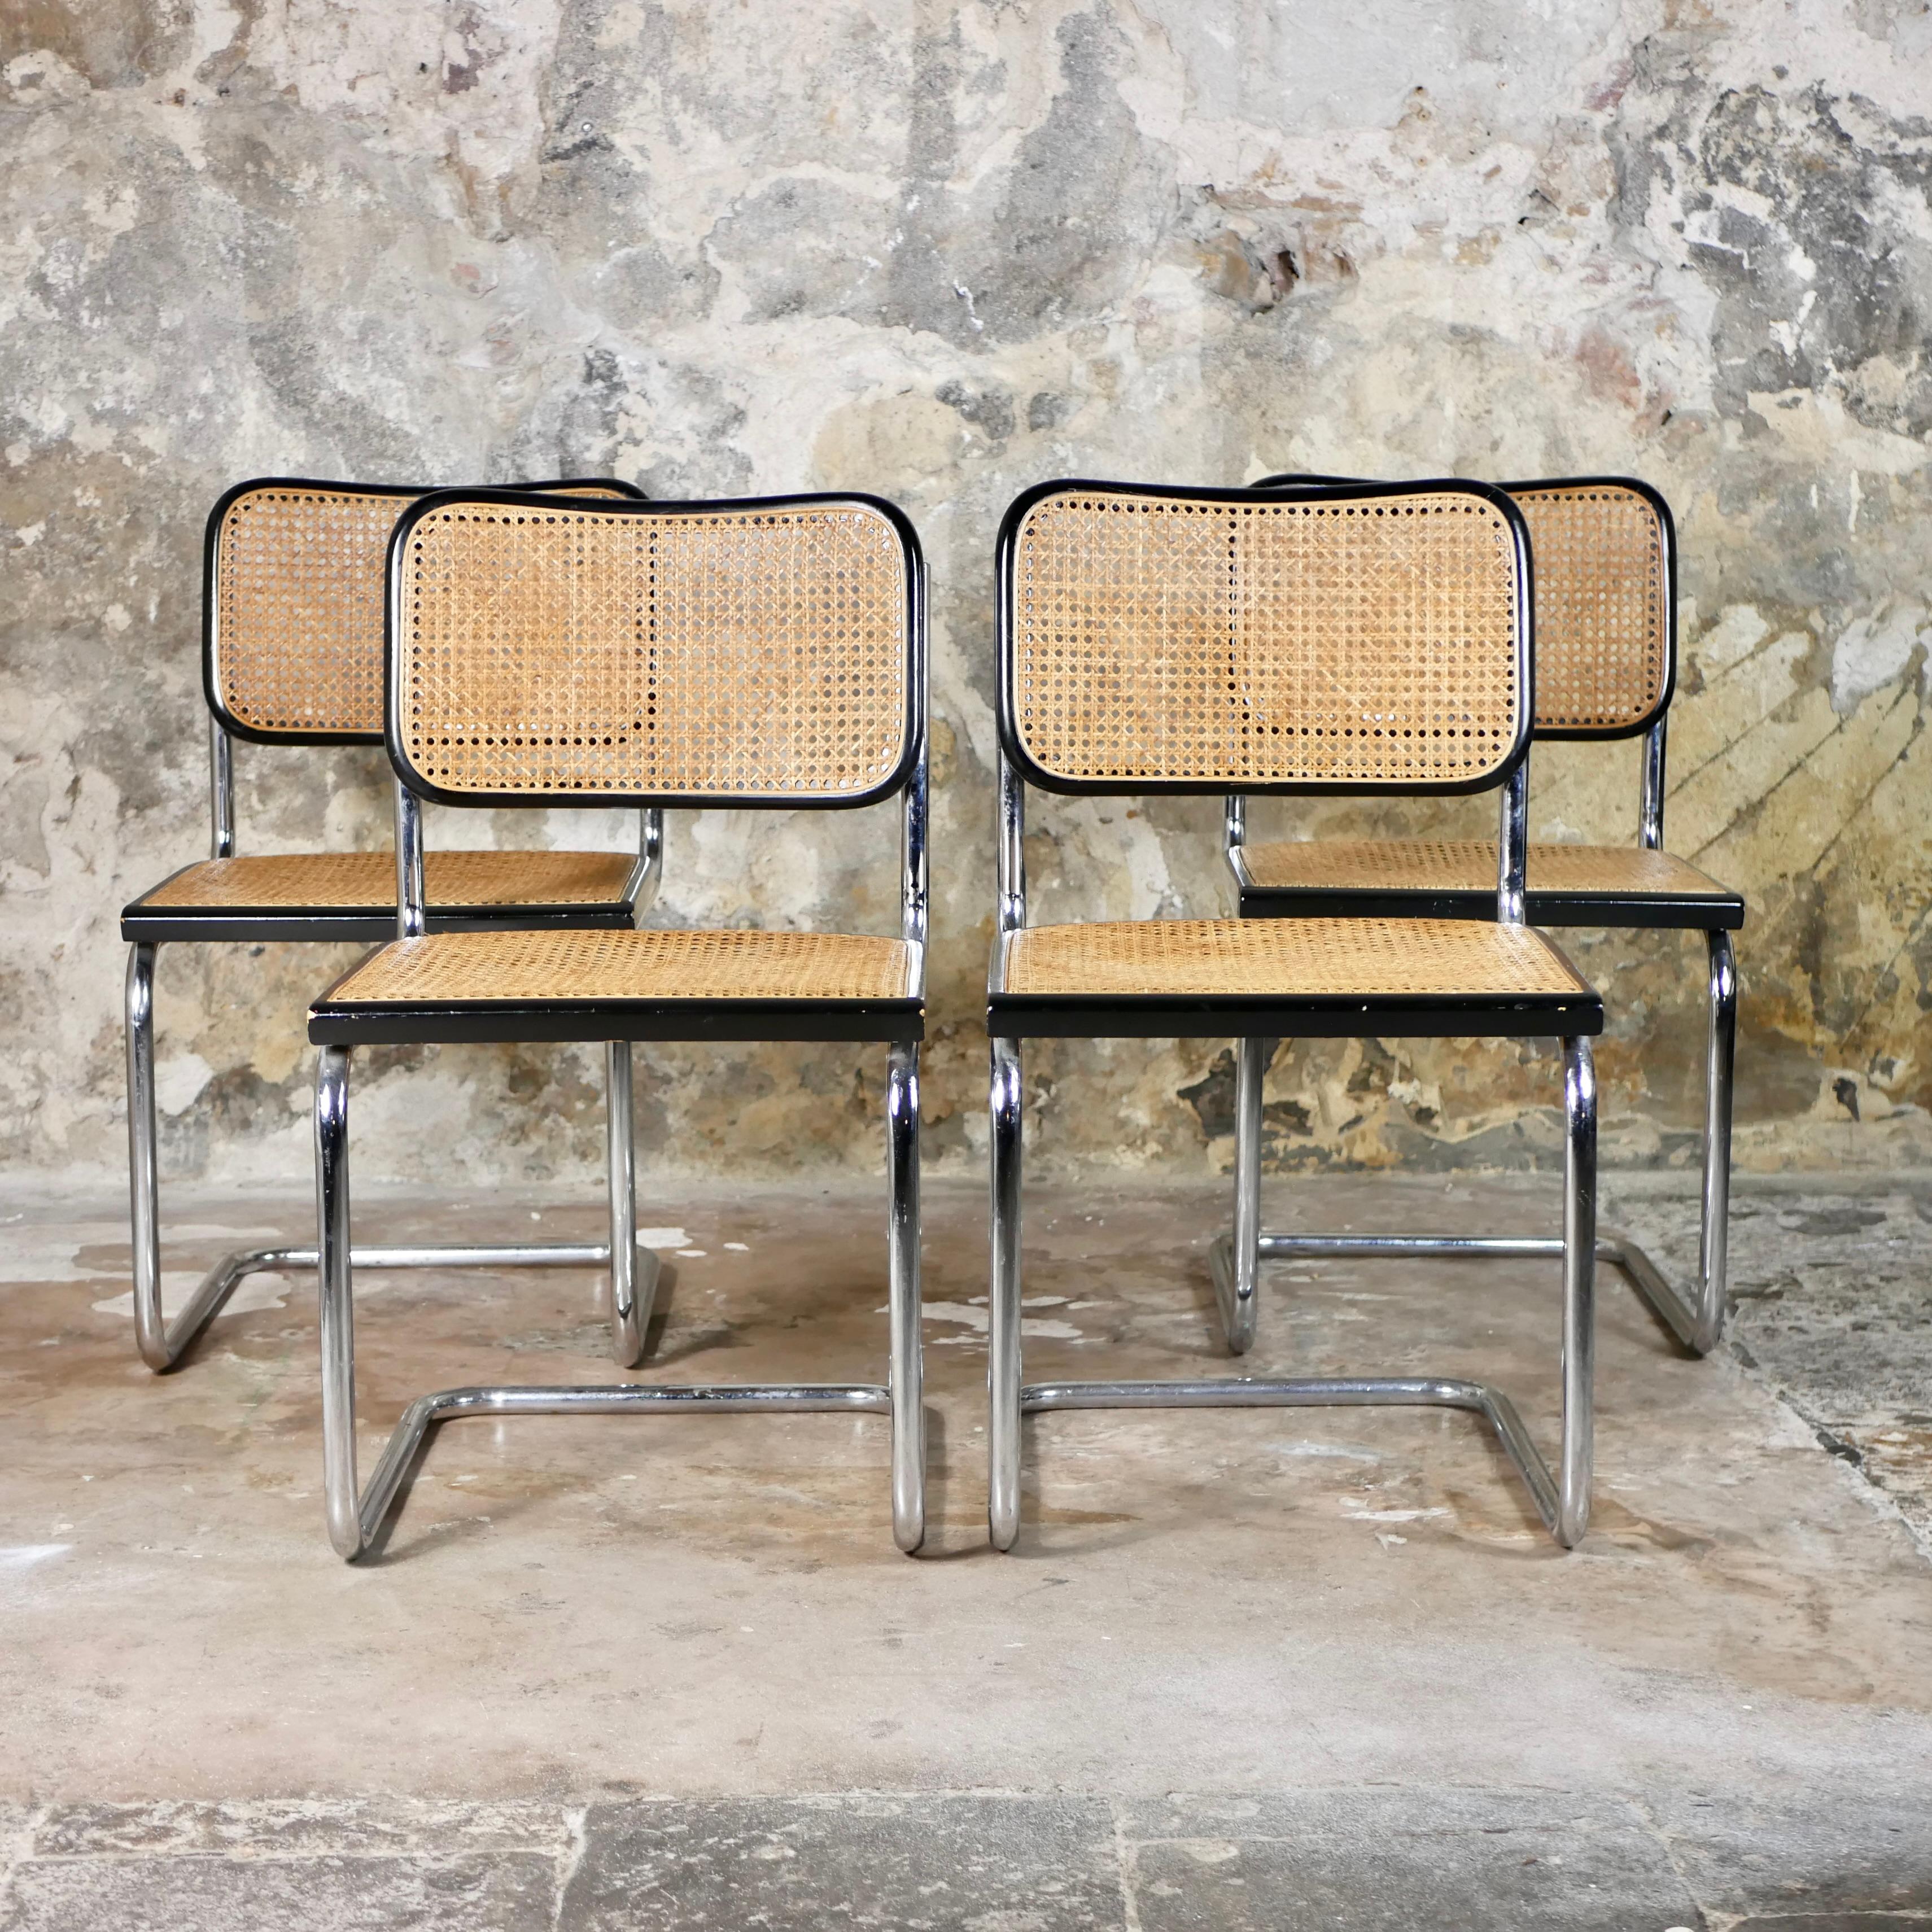 Bauhaus Set of 4 Cesca chairs designed by Marcel Breuer, made in Italy, 1970